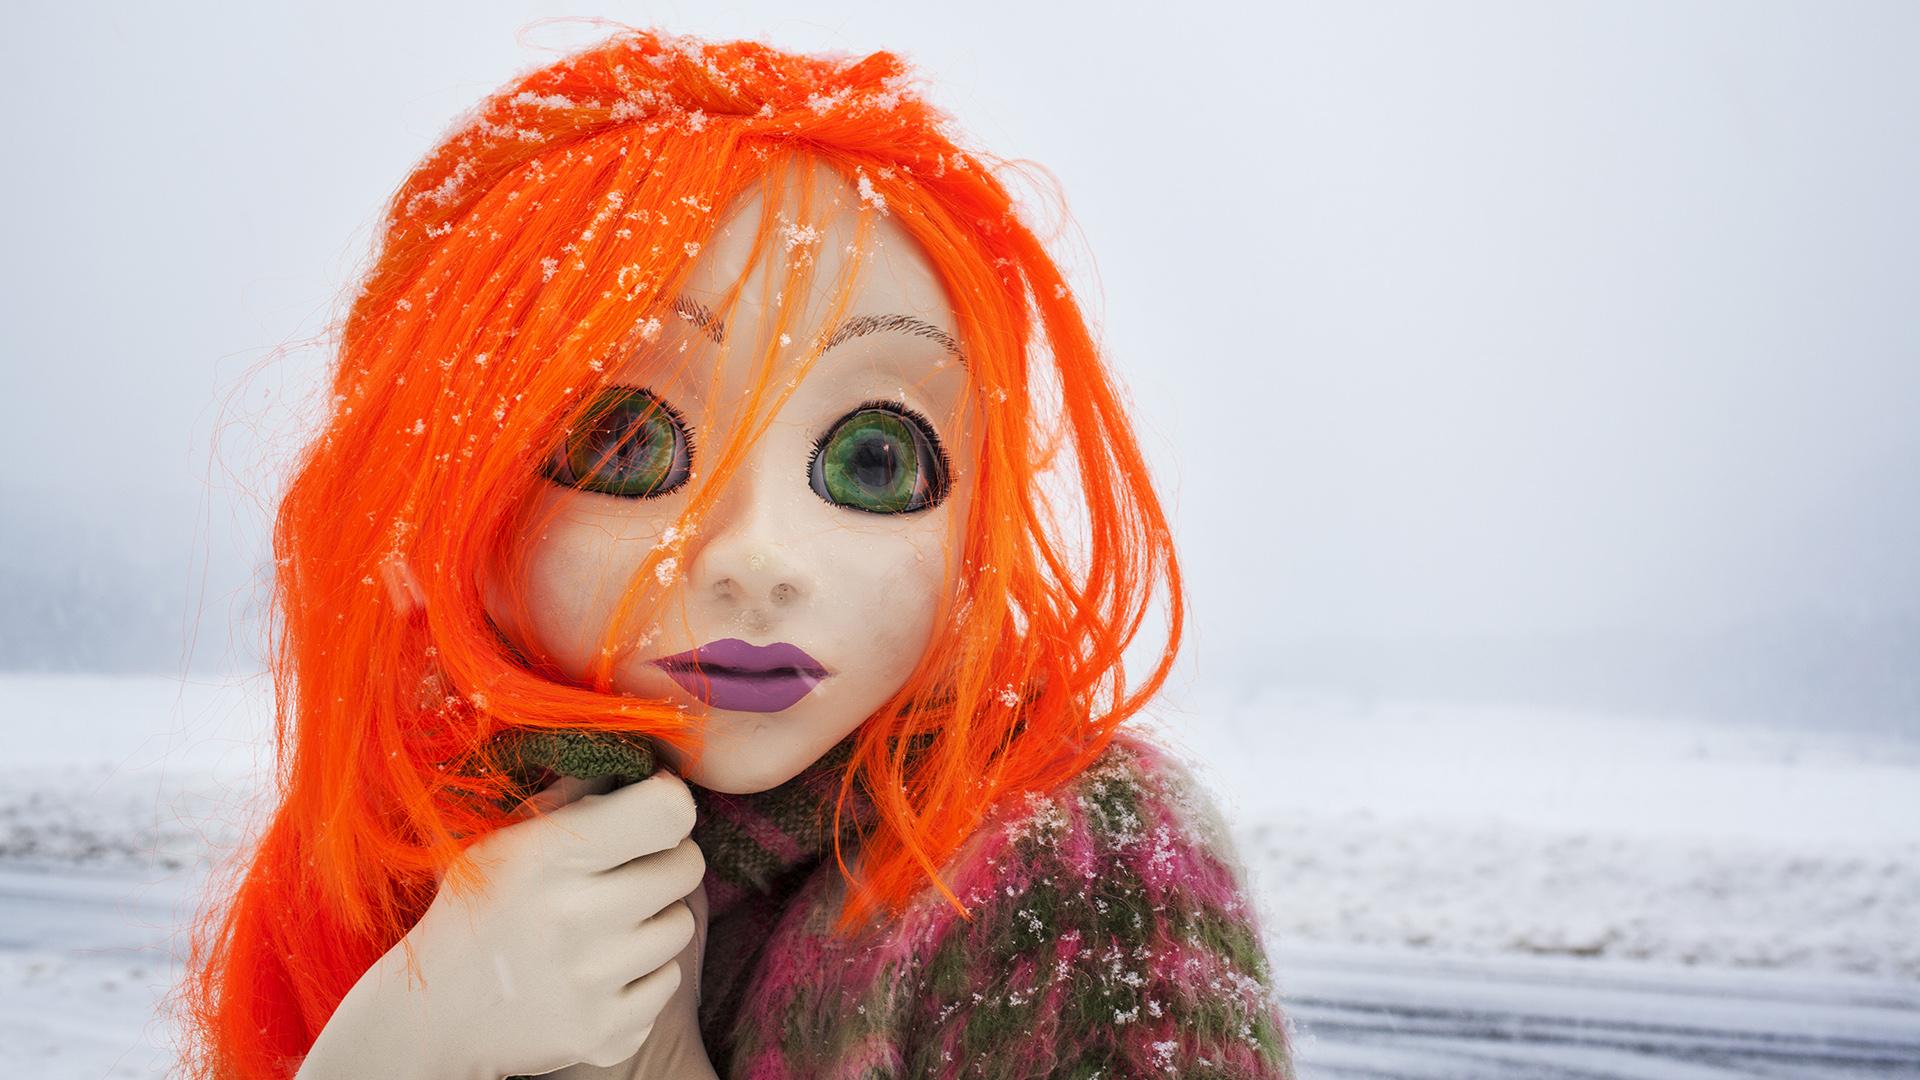 Laurie Simmons, Orange Hair/Snow/Close Up, 2014. Photo: © Laurie Simmons, courtesy of the artist and Salon 94.